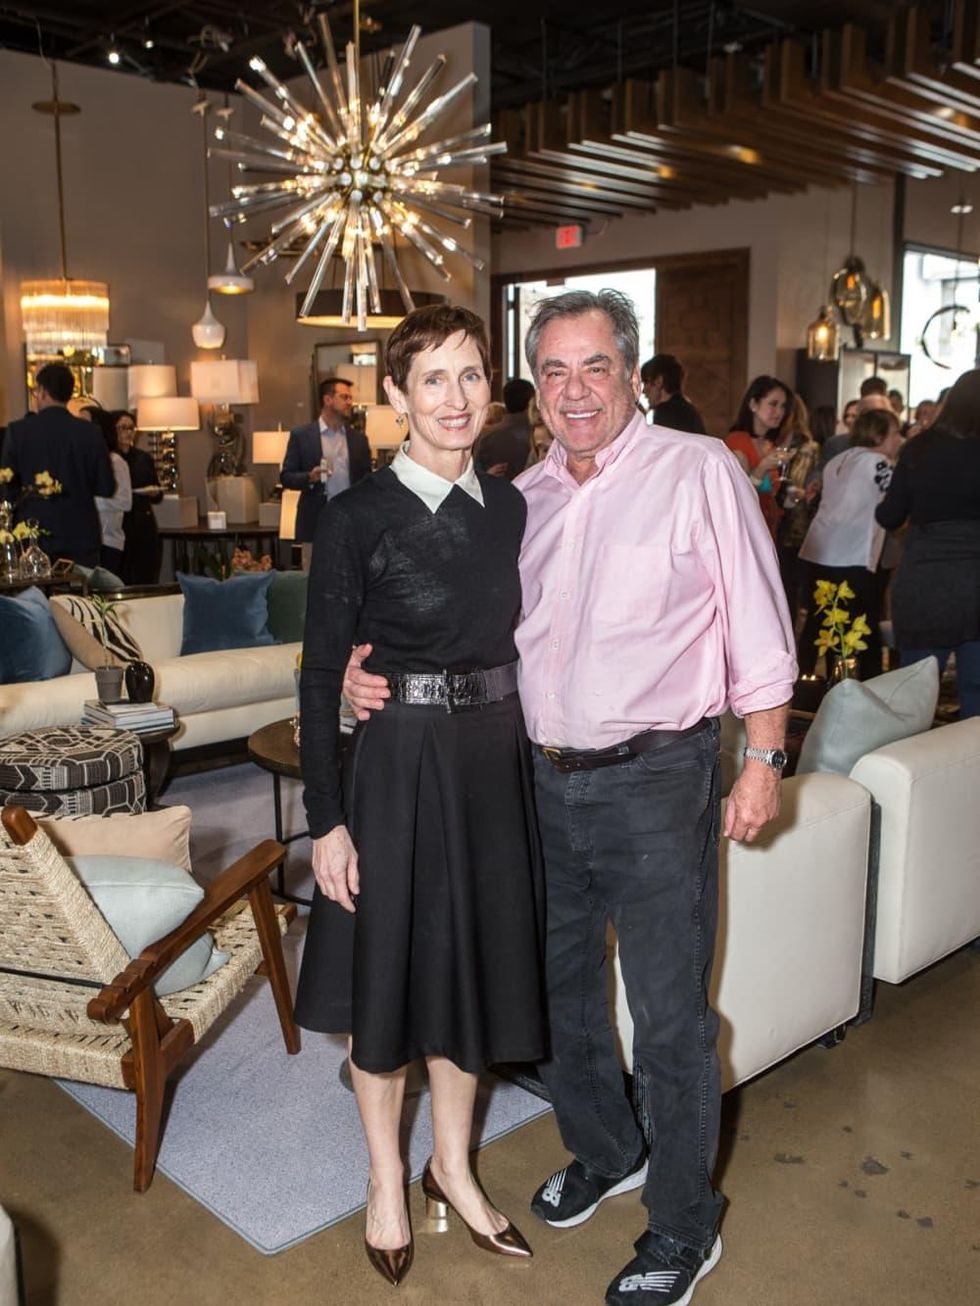 Robert and Meaders Ozarow, Empire Baking, Arteriors Party 2018